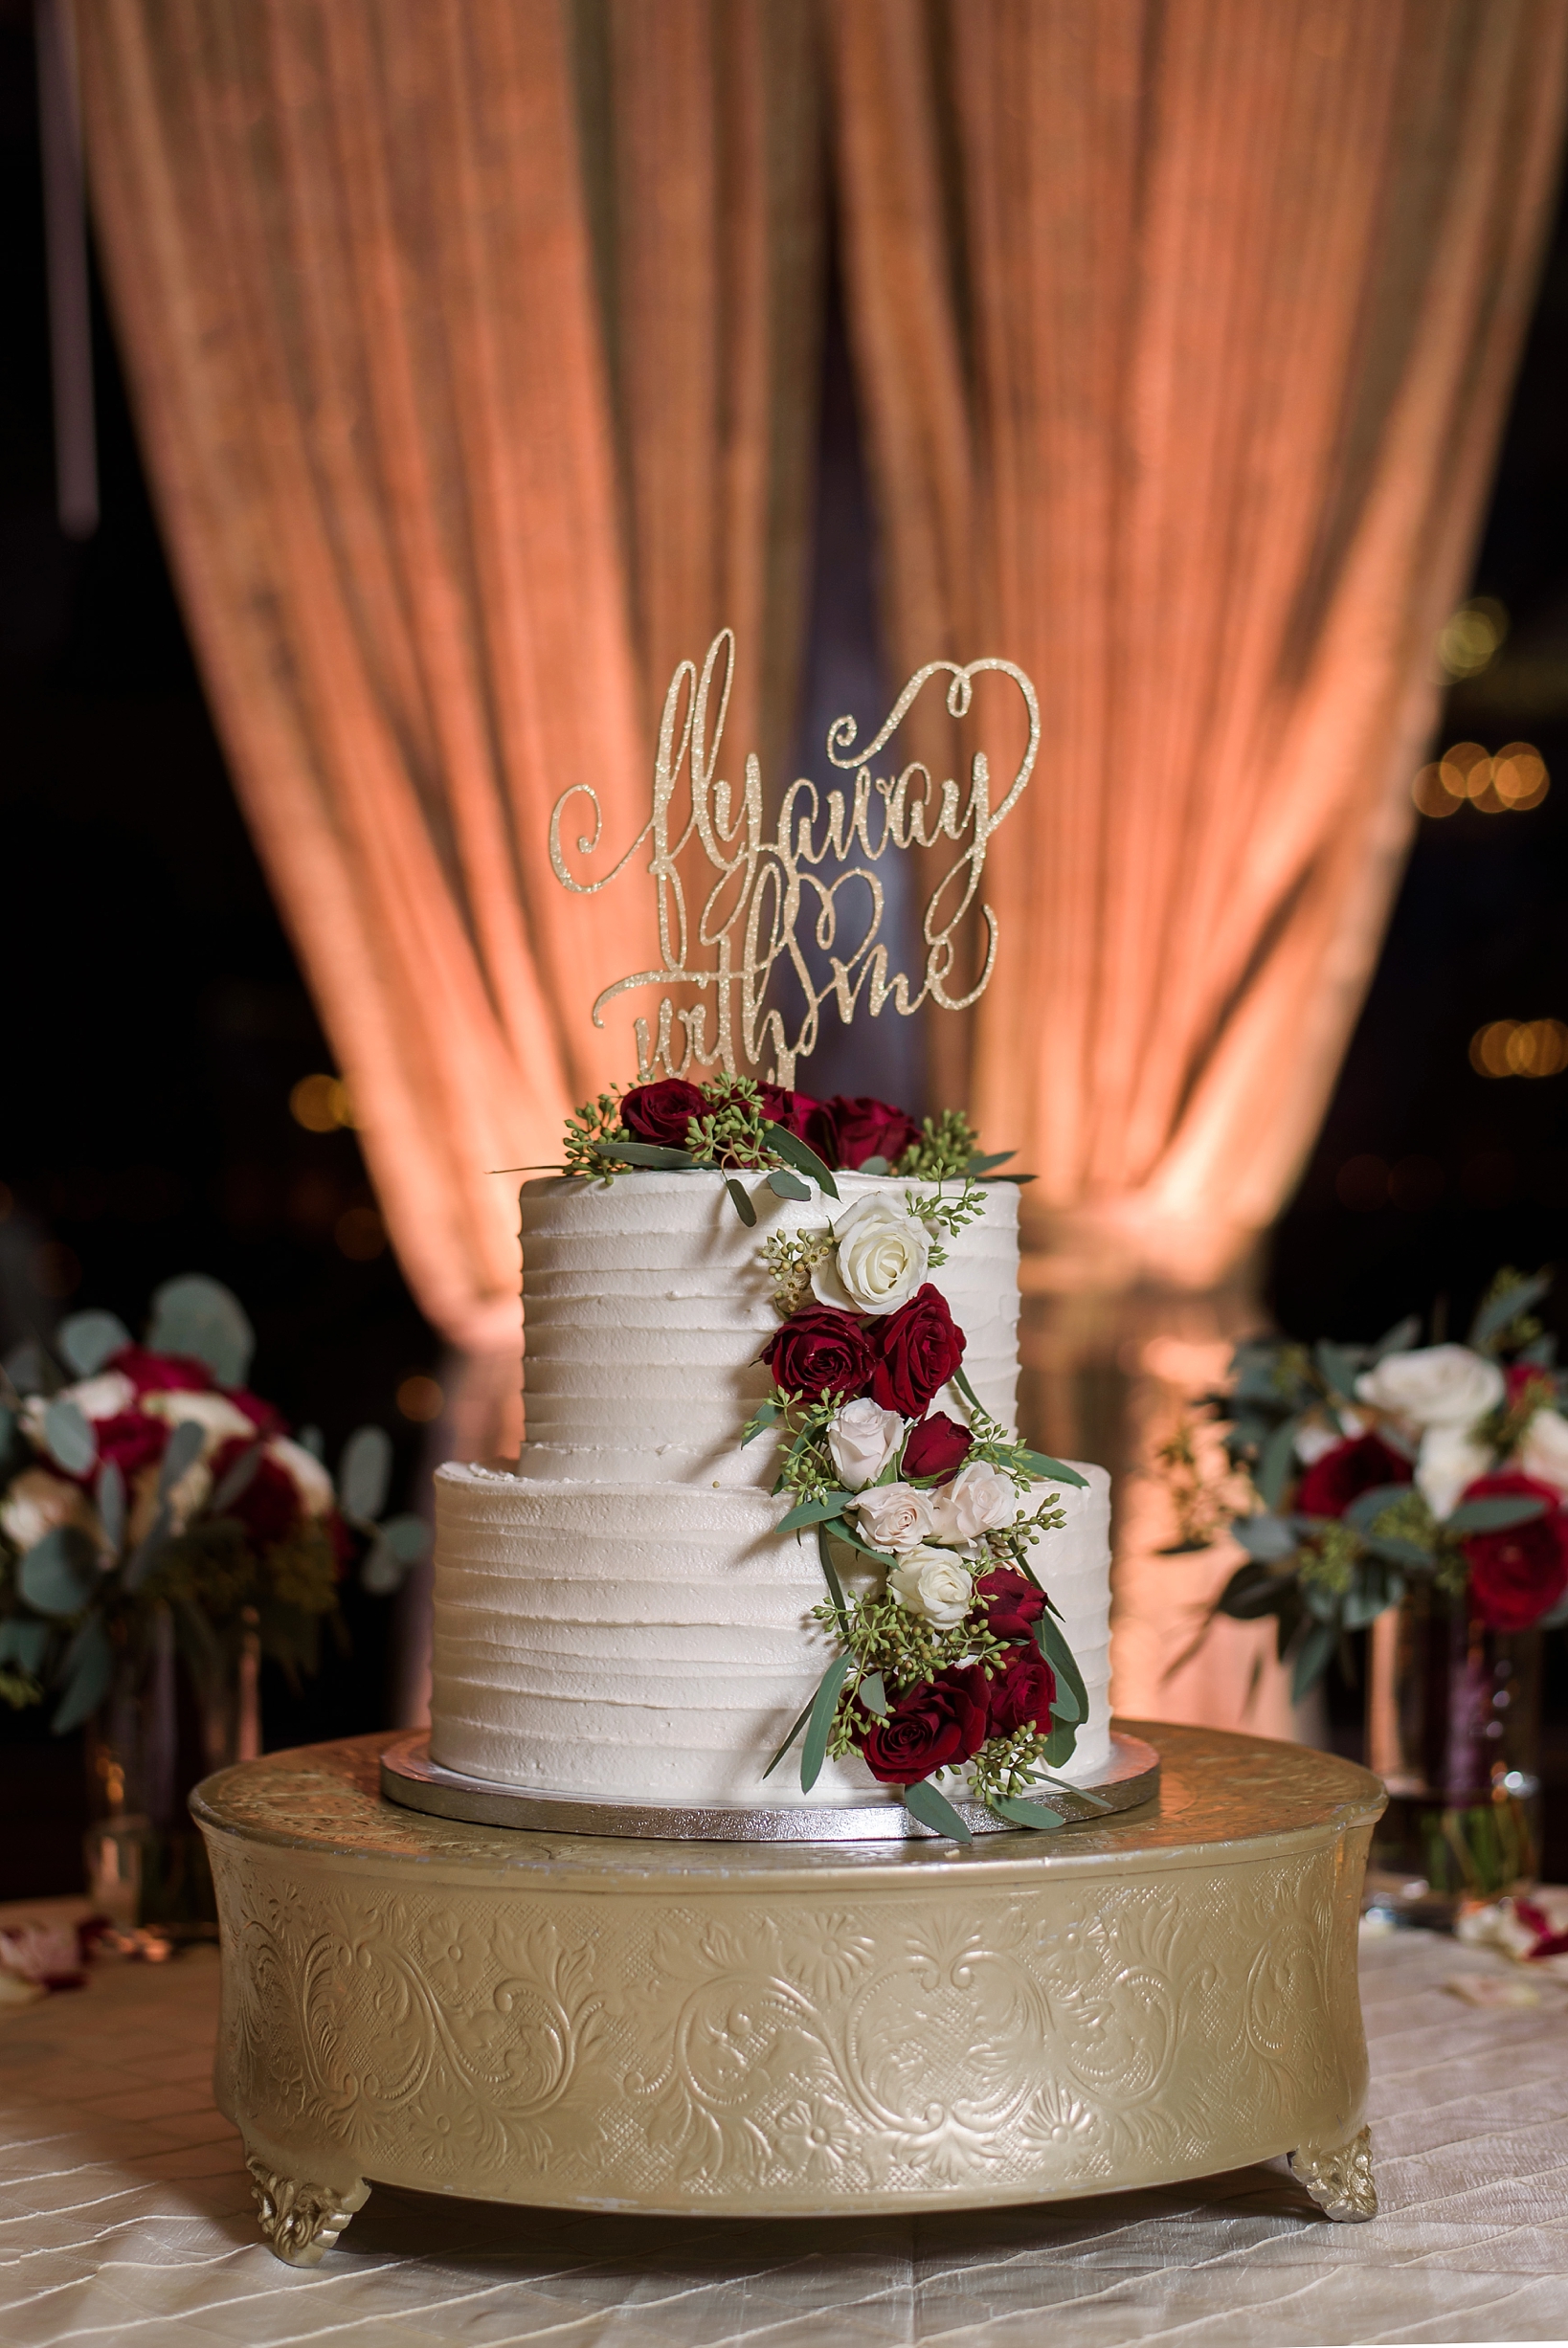 The beautiful wedding cake with topper that says, "Fly away with me"